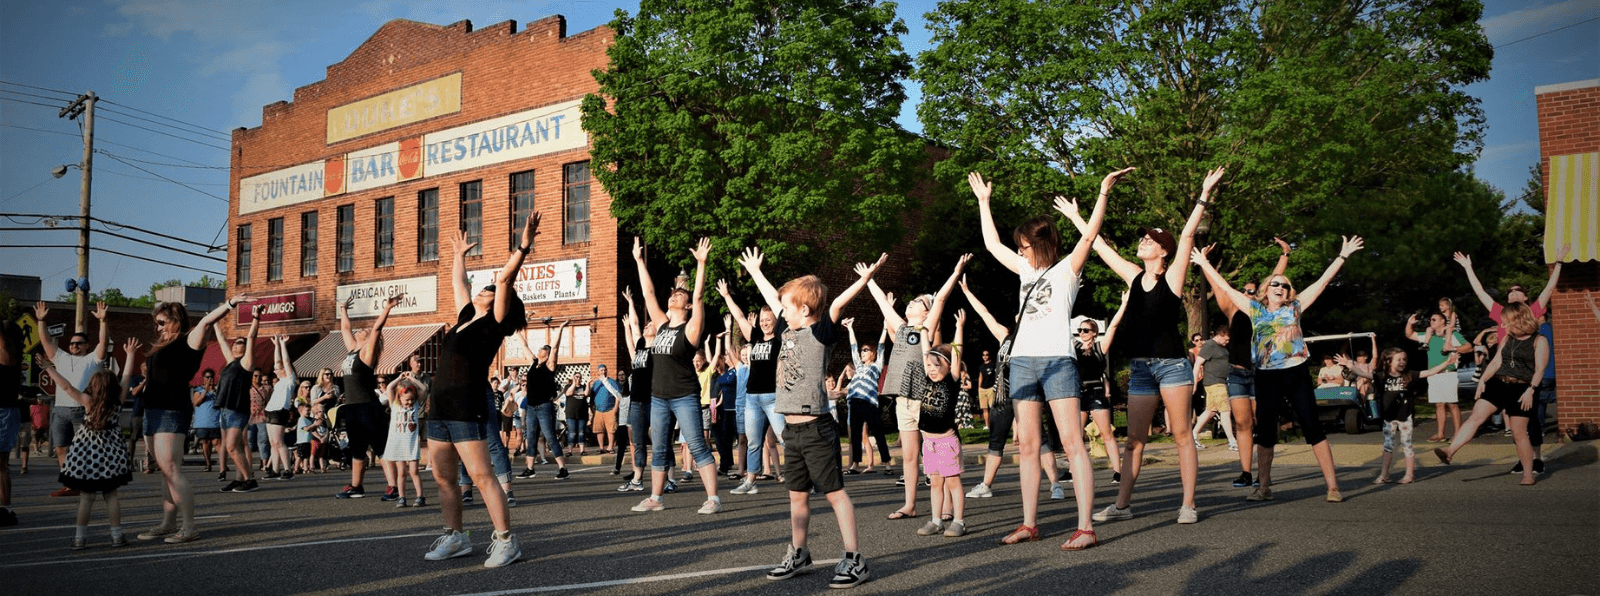 Youth and adults outdoors with their arms extending up participating in a flash mob dance